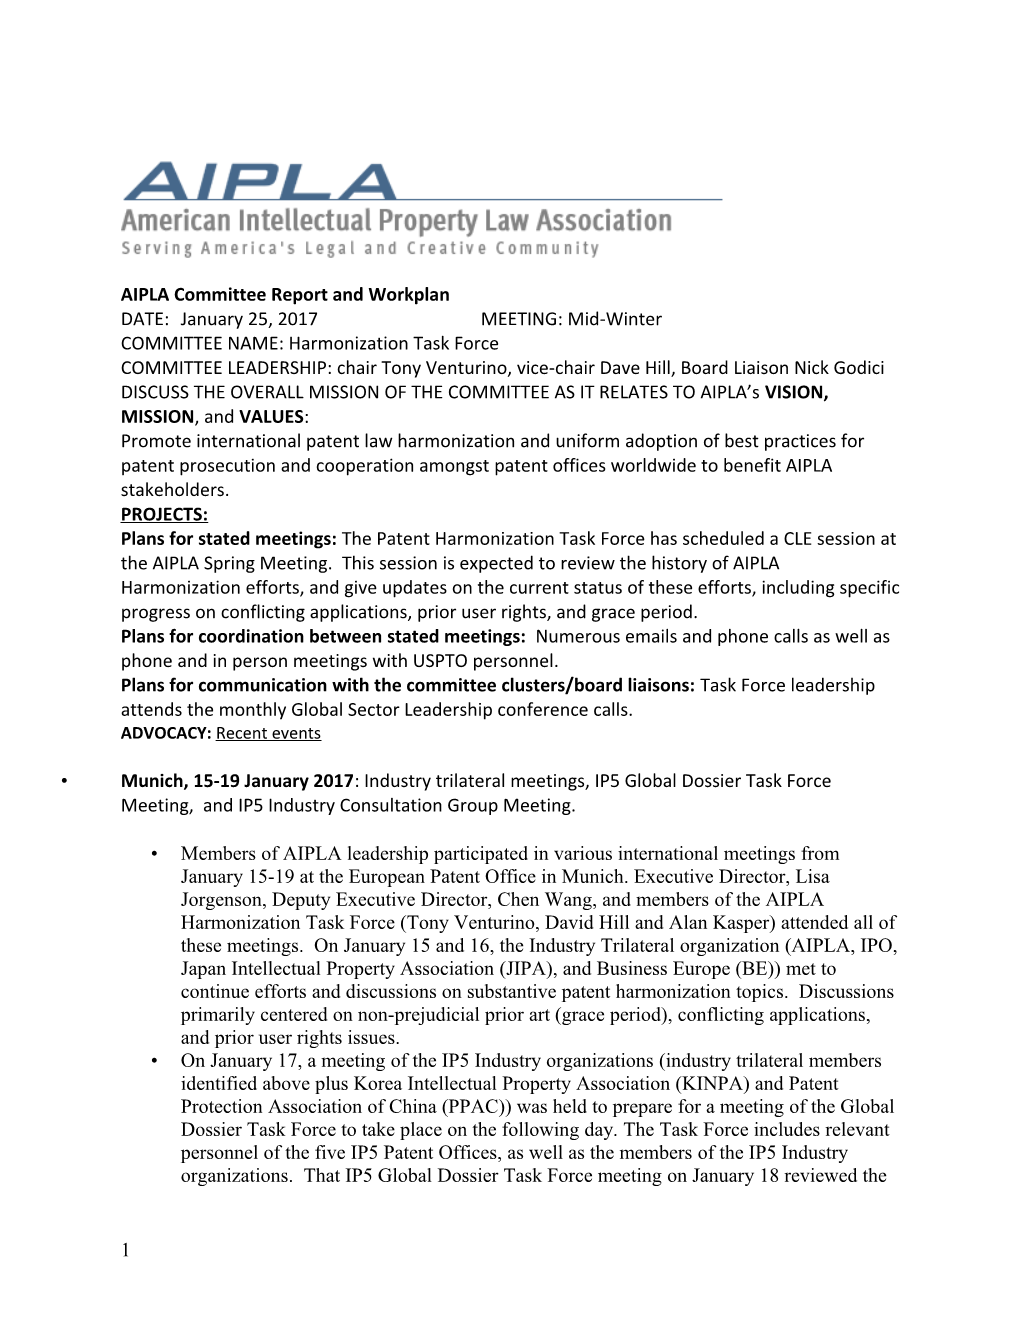 AIPLA Committee Report and Workplan